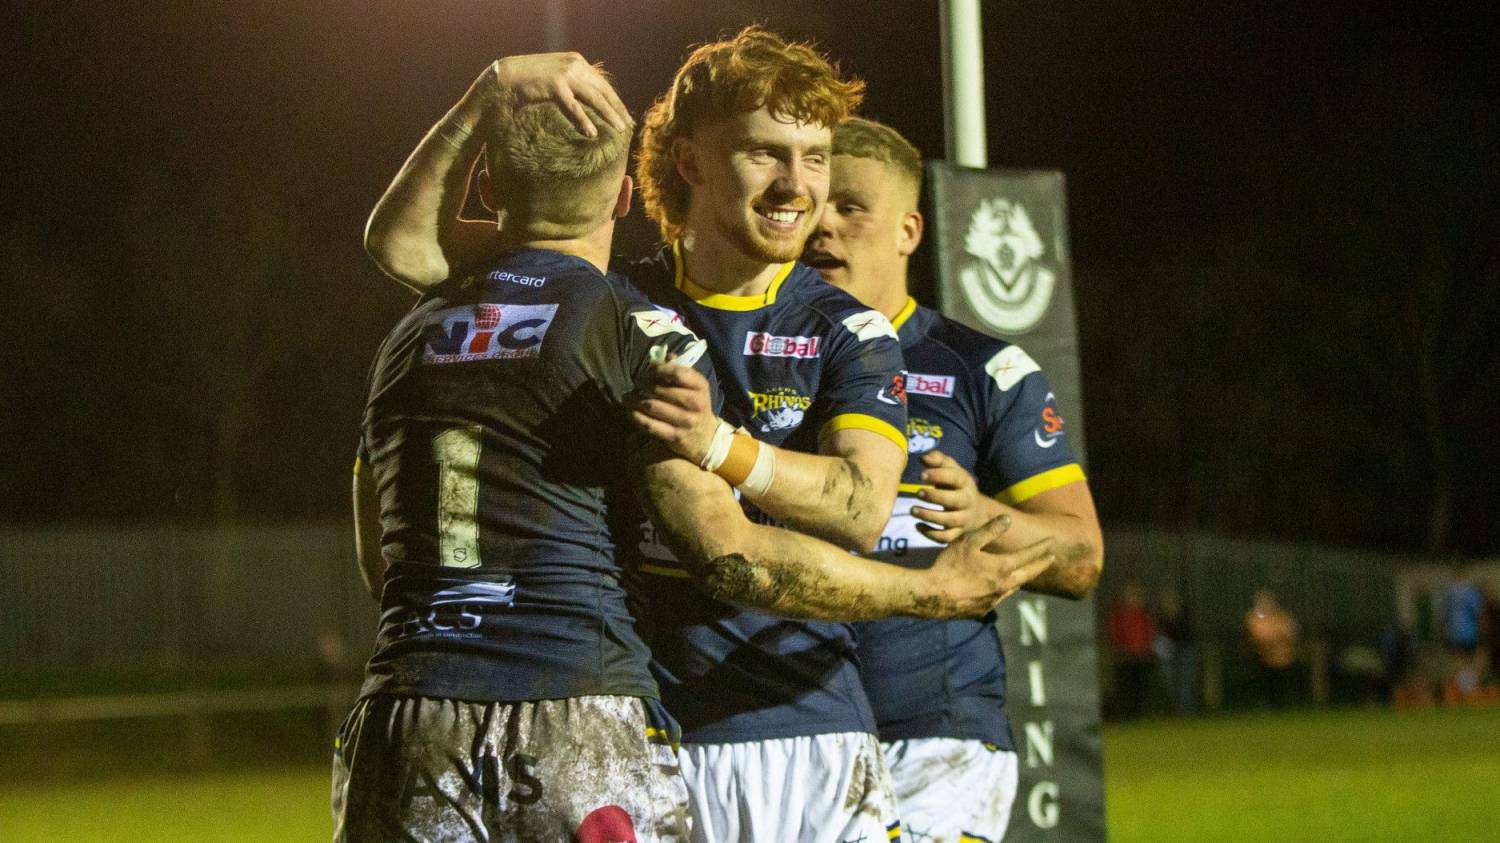 Watch Leeds Rhinos Reserves live this Friday